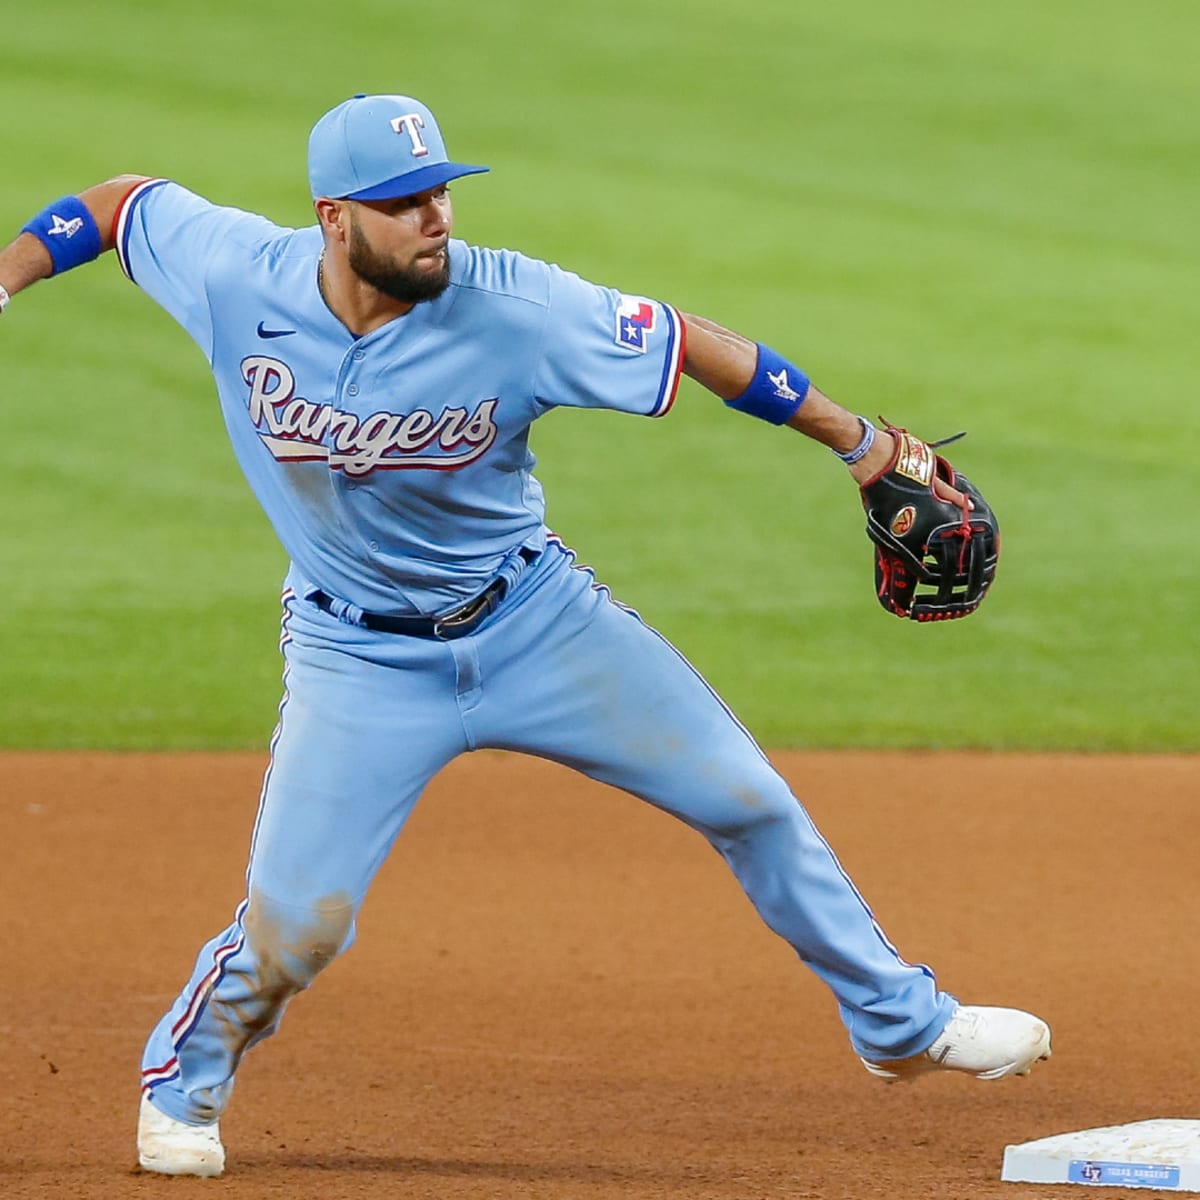 Isiah Kiner-Falefa's athleticism earns him more time in